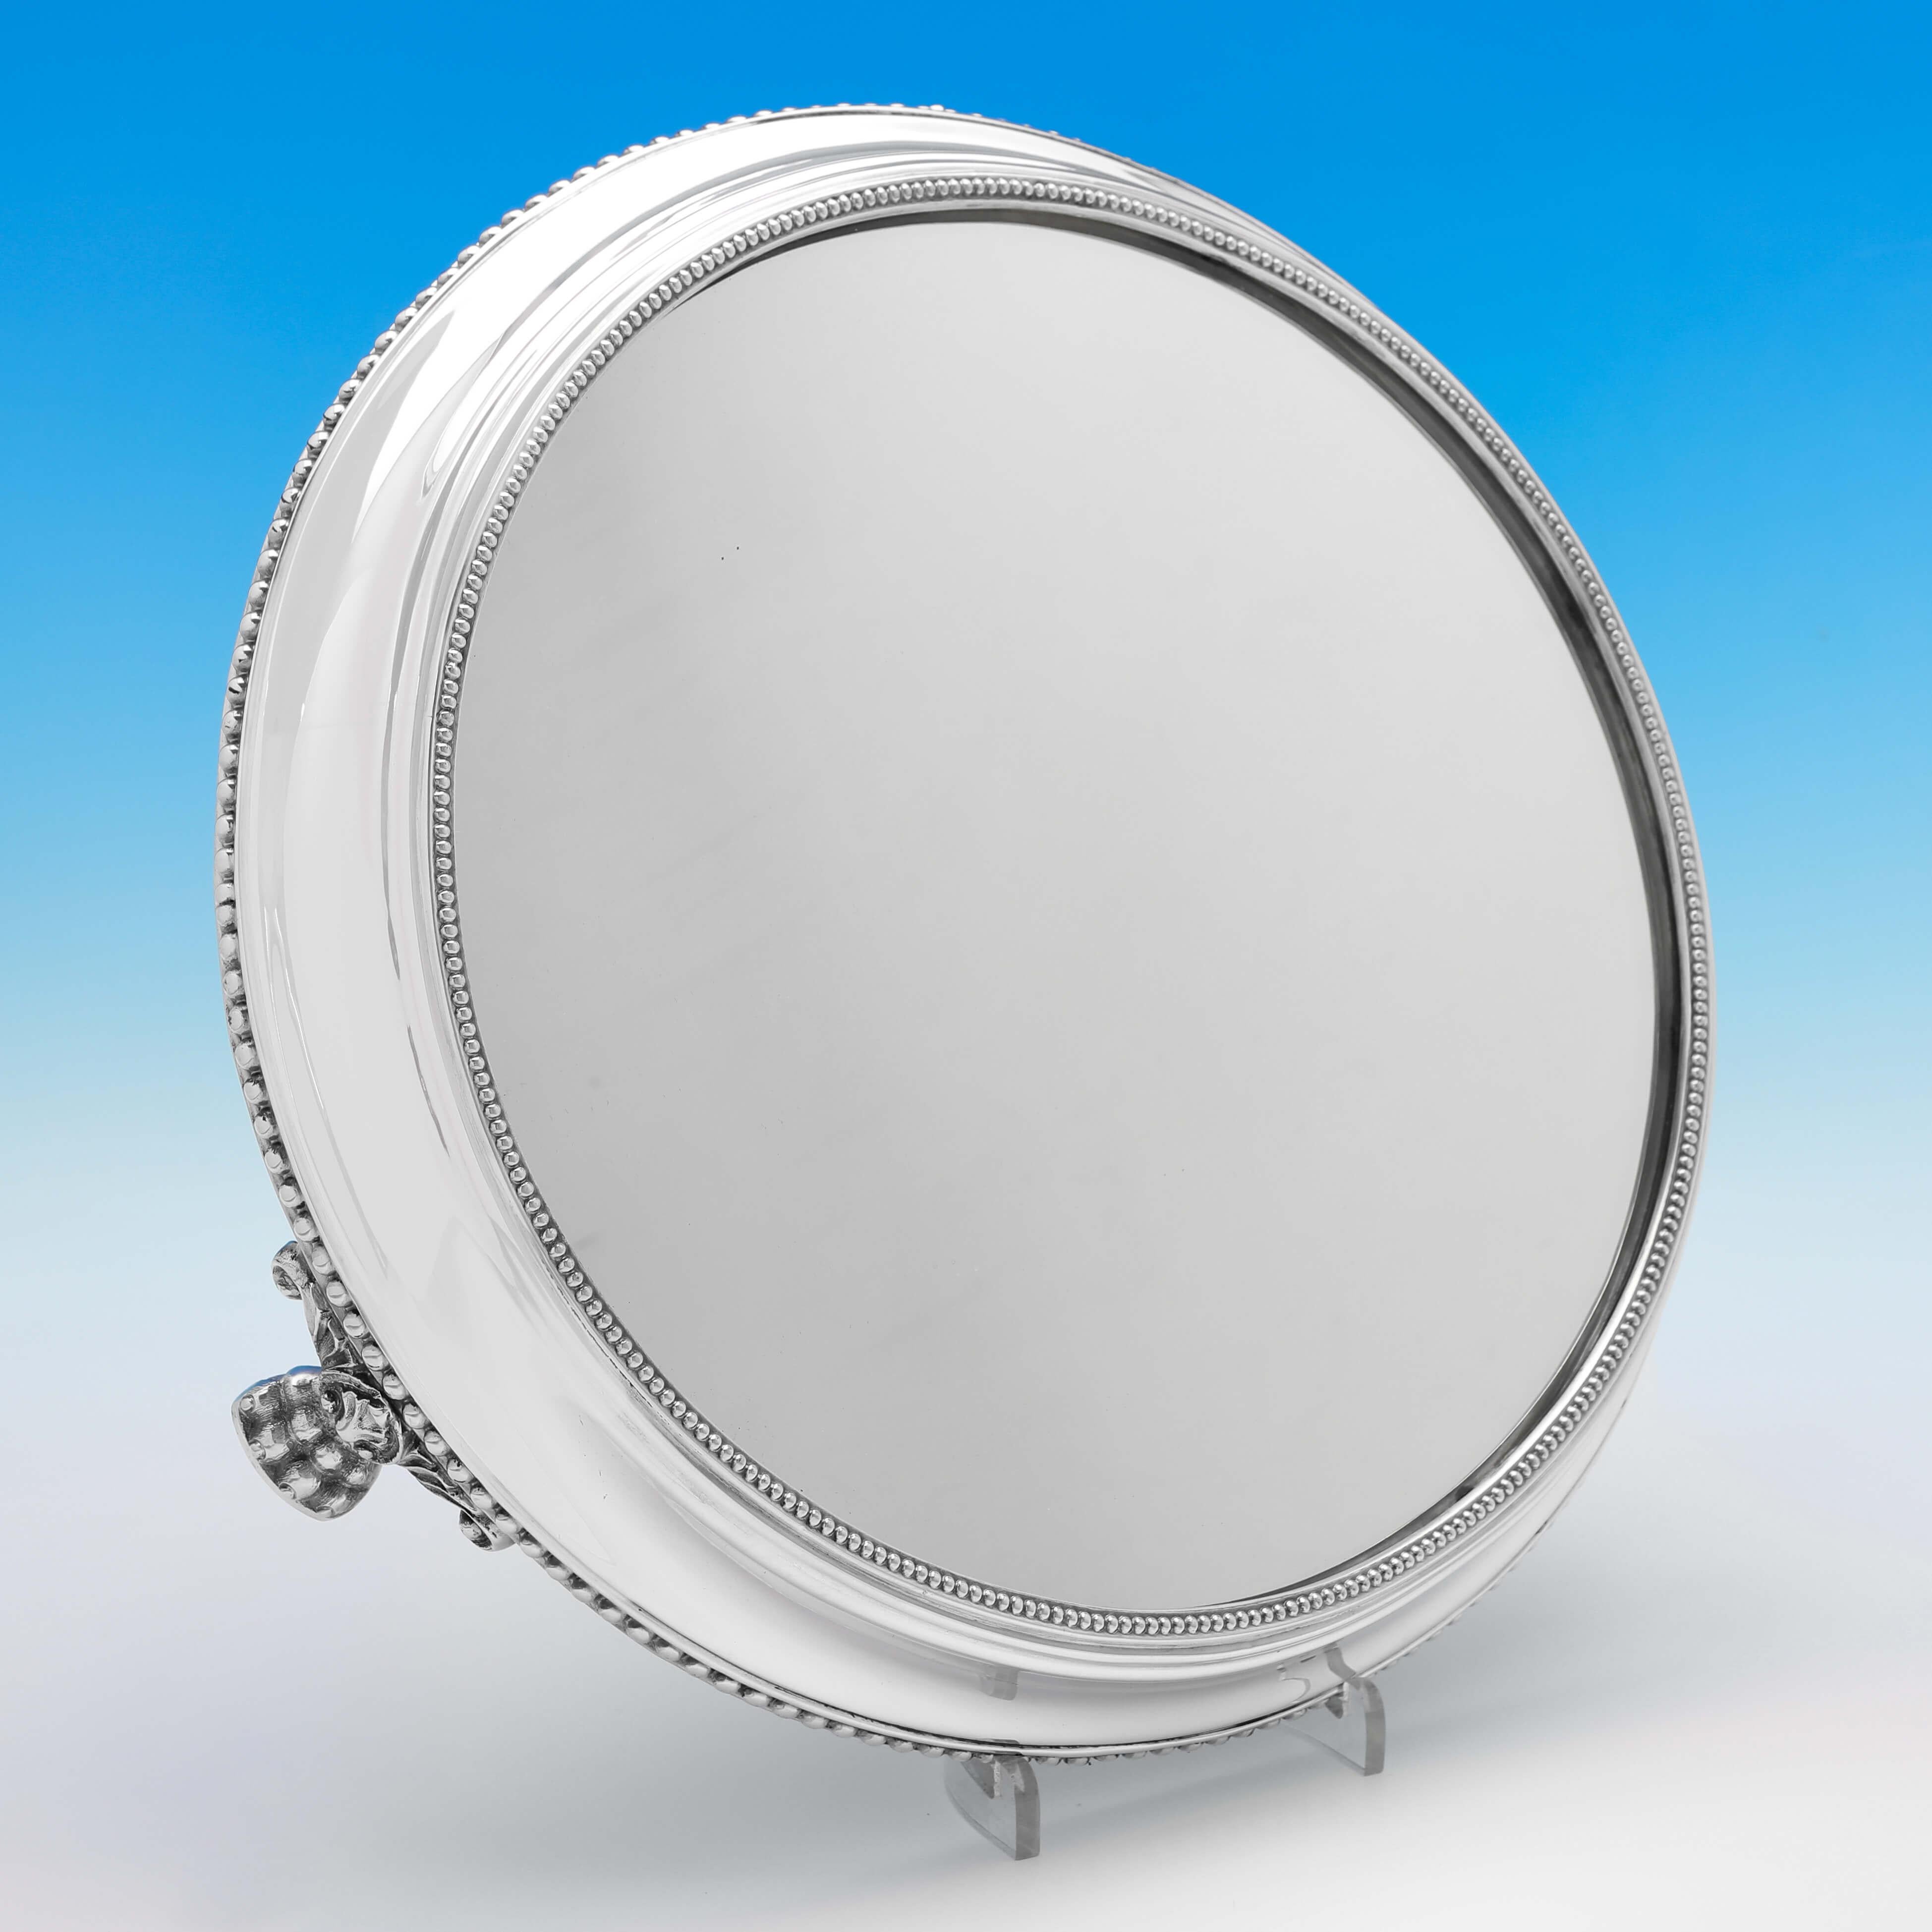 Hallmarked in Sheffield in 1885 by W. W. Harrison, this handsome, Victorian, Antique Sterling Silver Mirror Plateau, stands on 3 feet, and features bead borders to the base and top. 

The mirror plateau measures 3